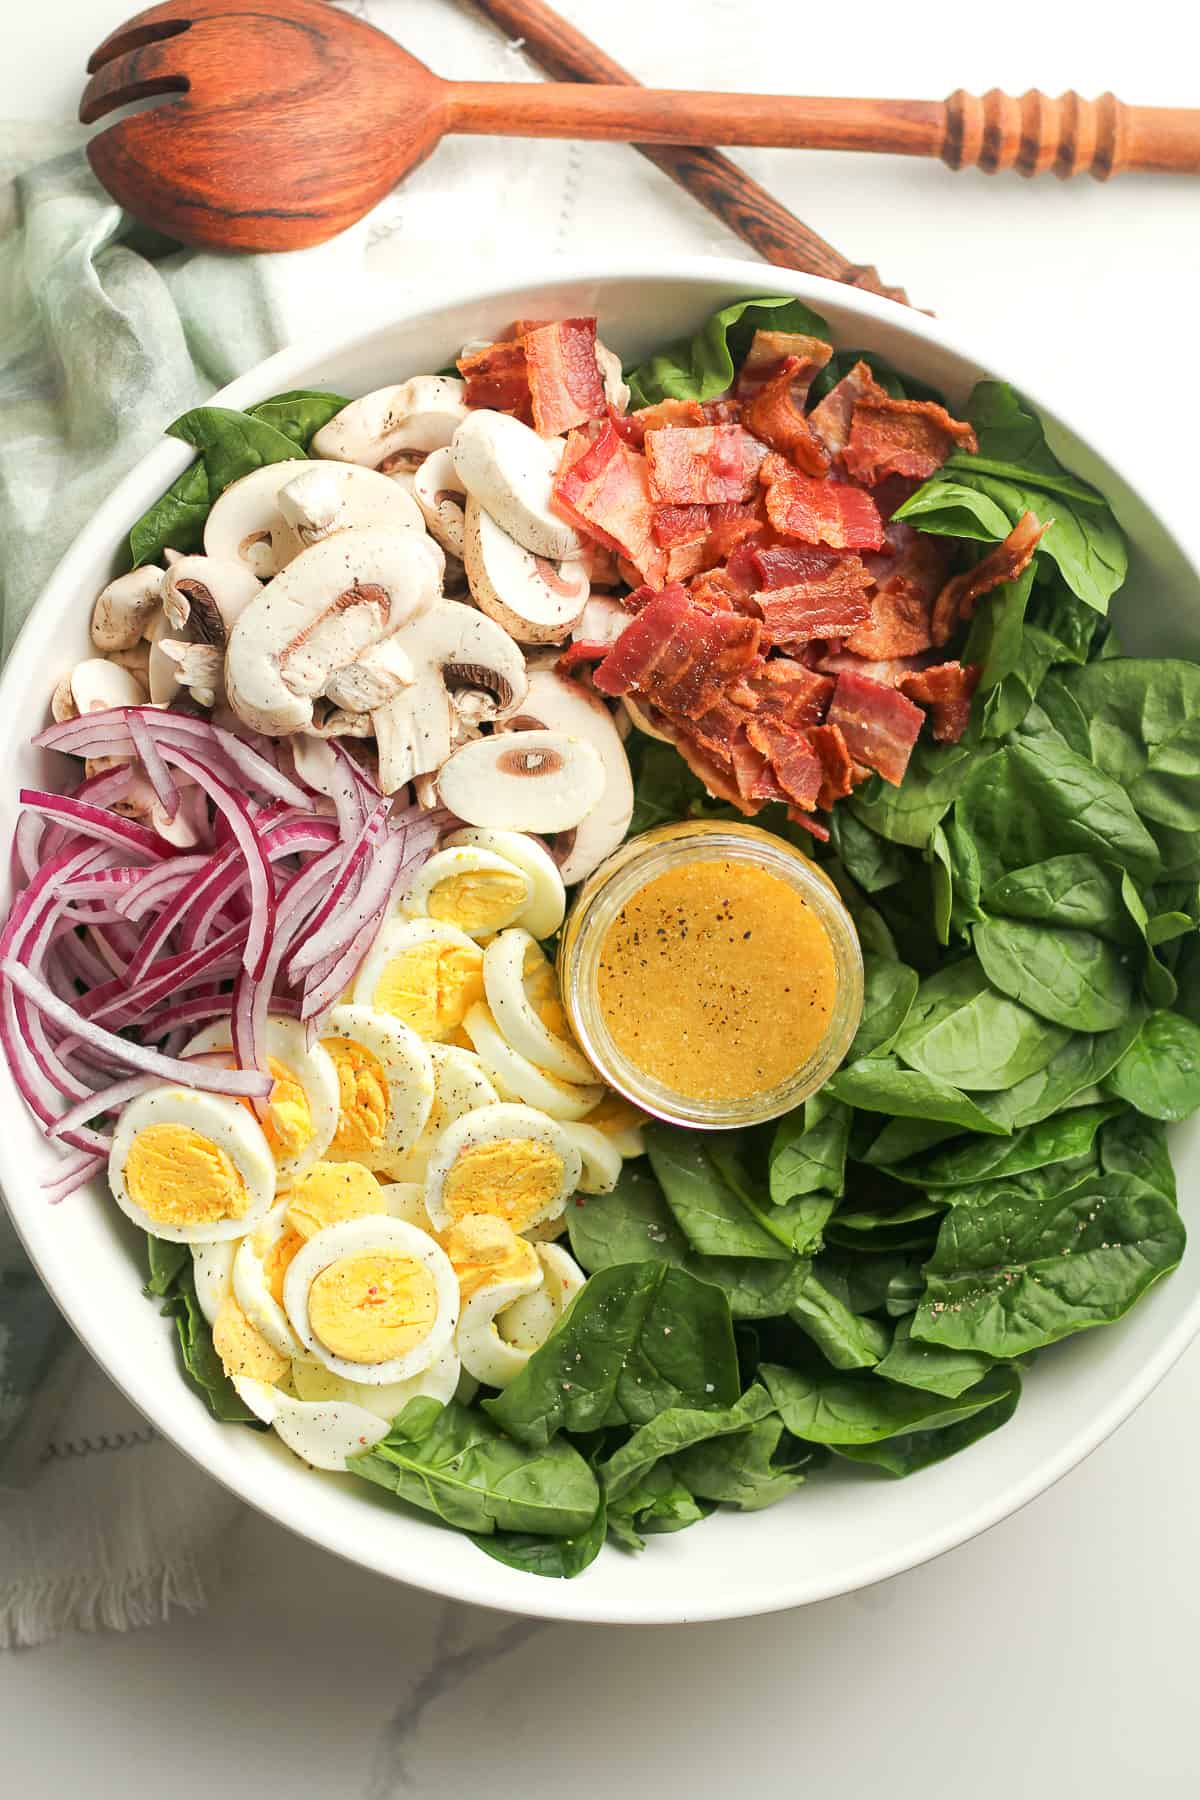 The bowl of spinach salad by ingredient with the jar of dressing.